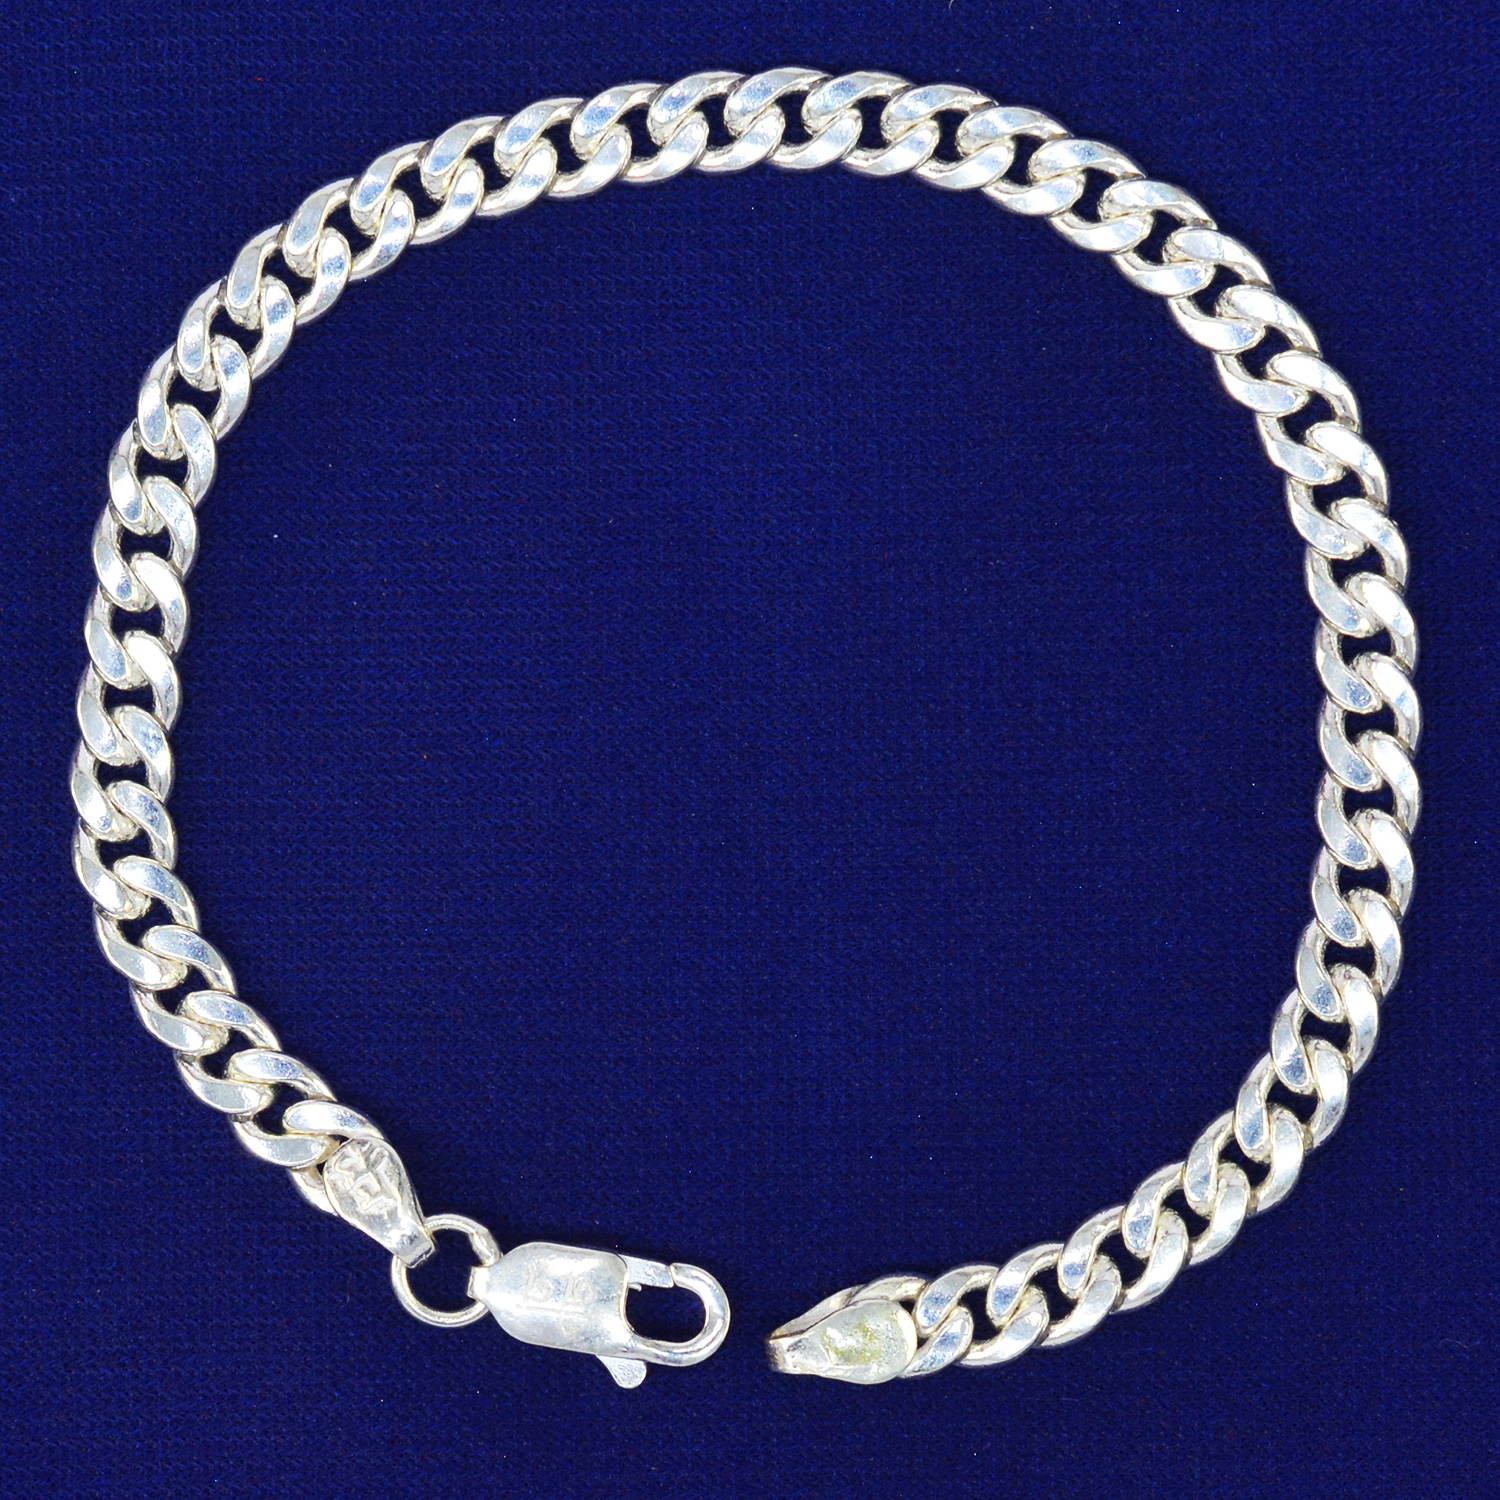 Real 14K Yellow Gold Polished Link Chain Bracelet; 7.5 inch; Lobster Clasp  | eBay